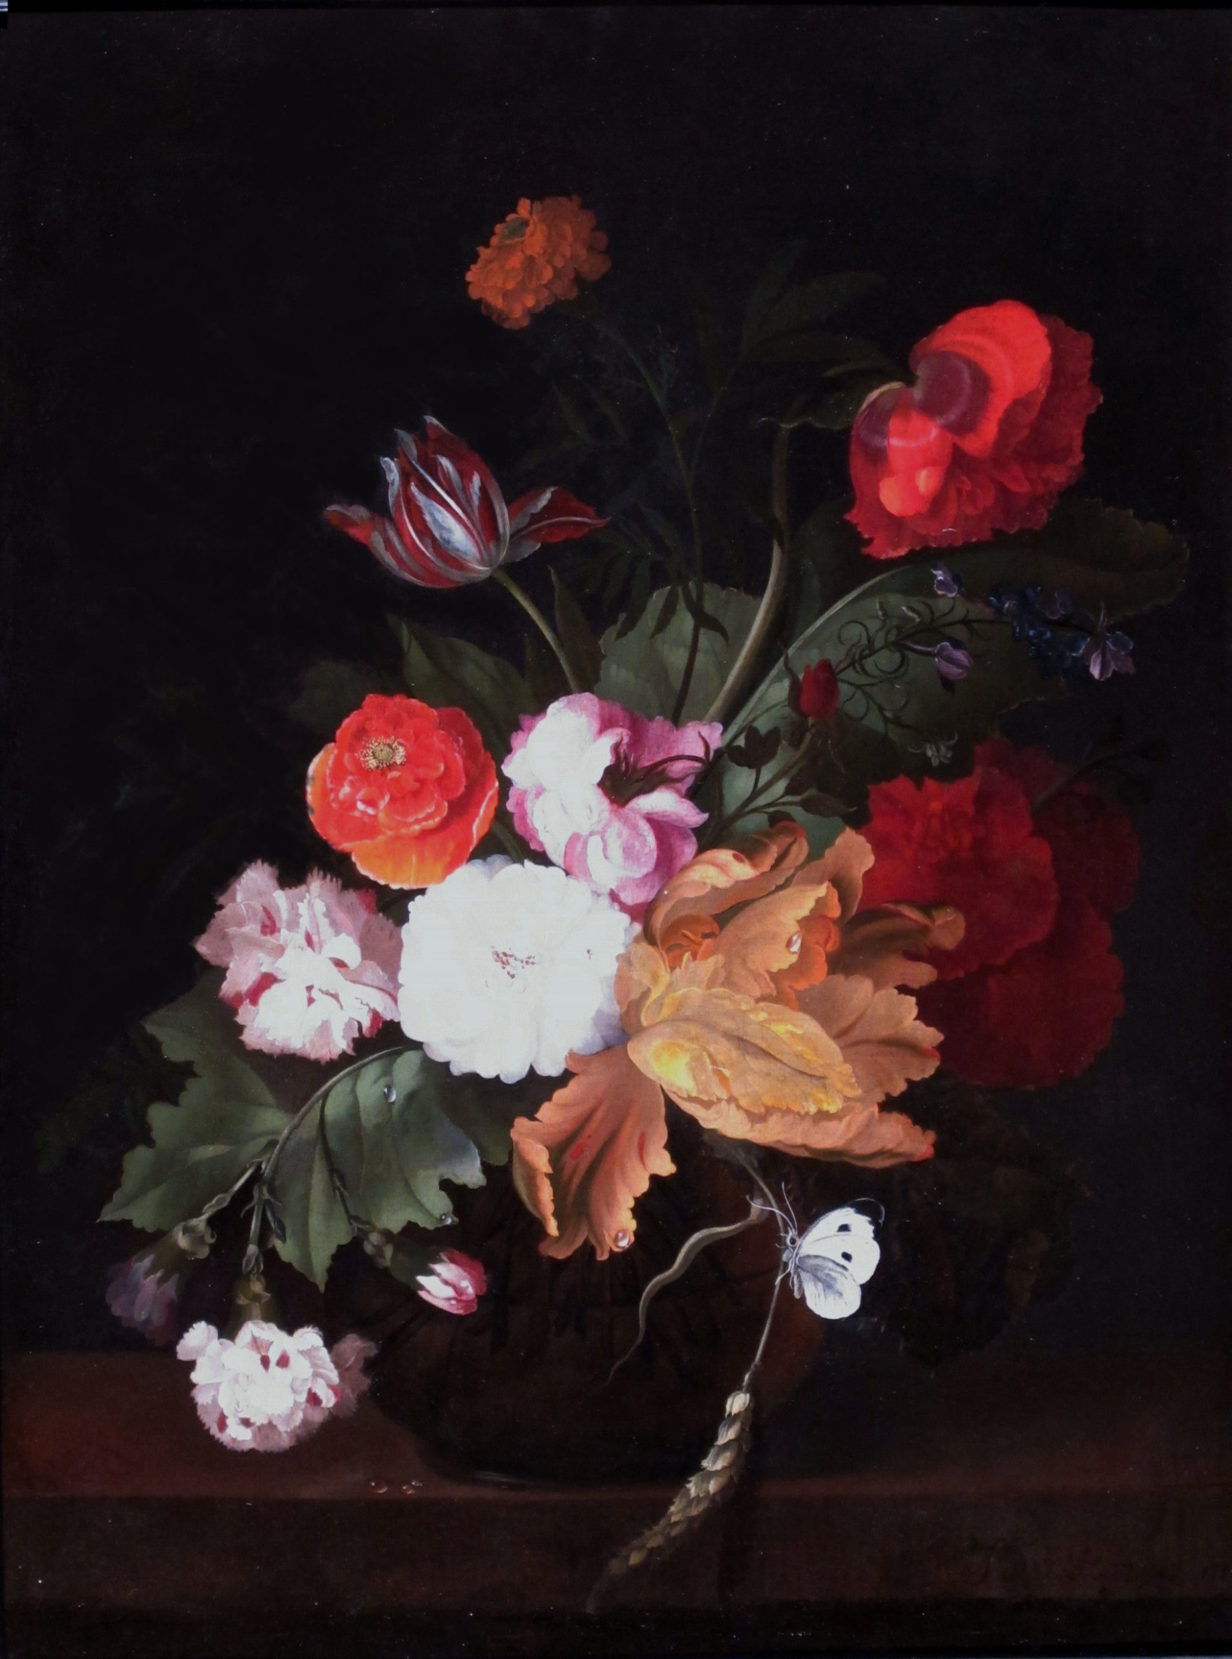 Manner of van huysum - an 18th century still life oil of mixed flowers in a glass vase